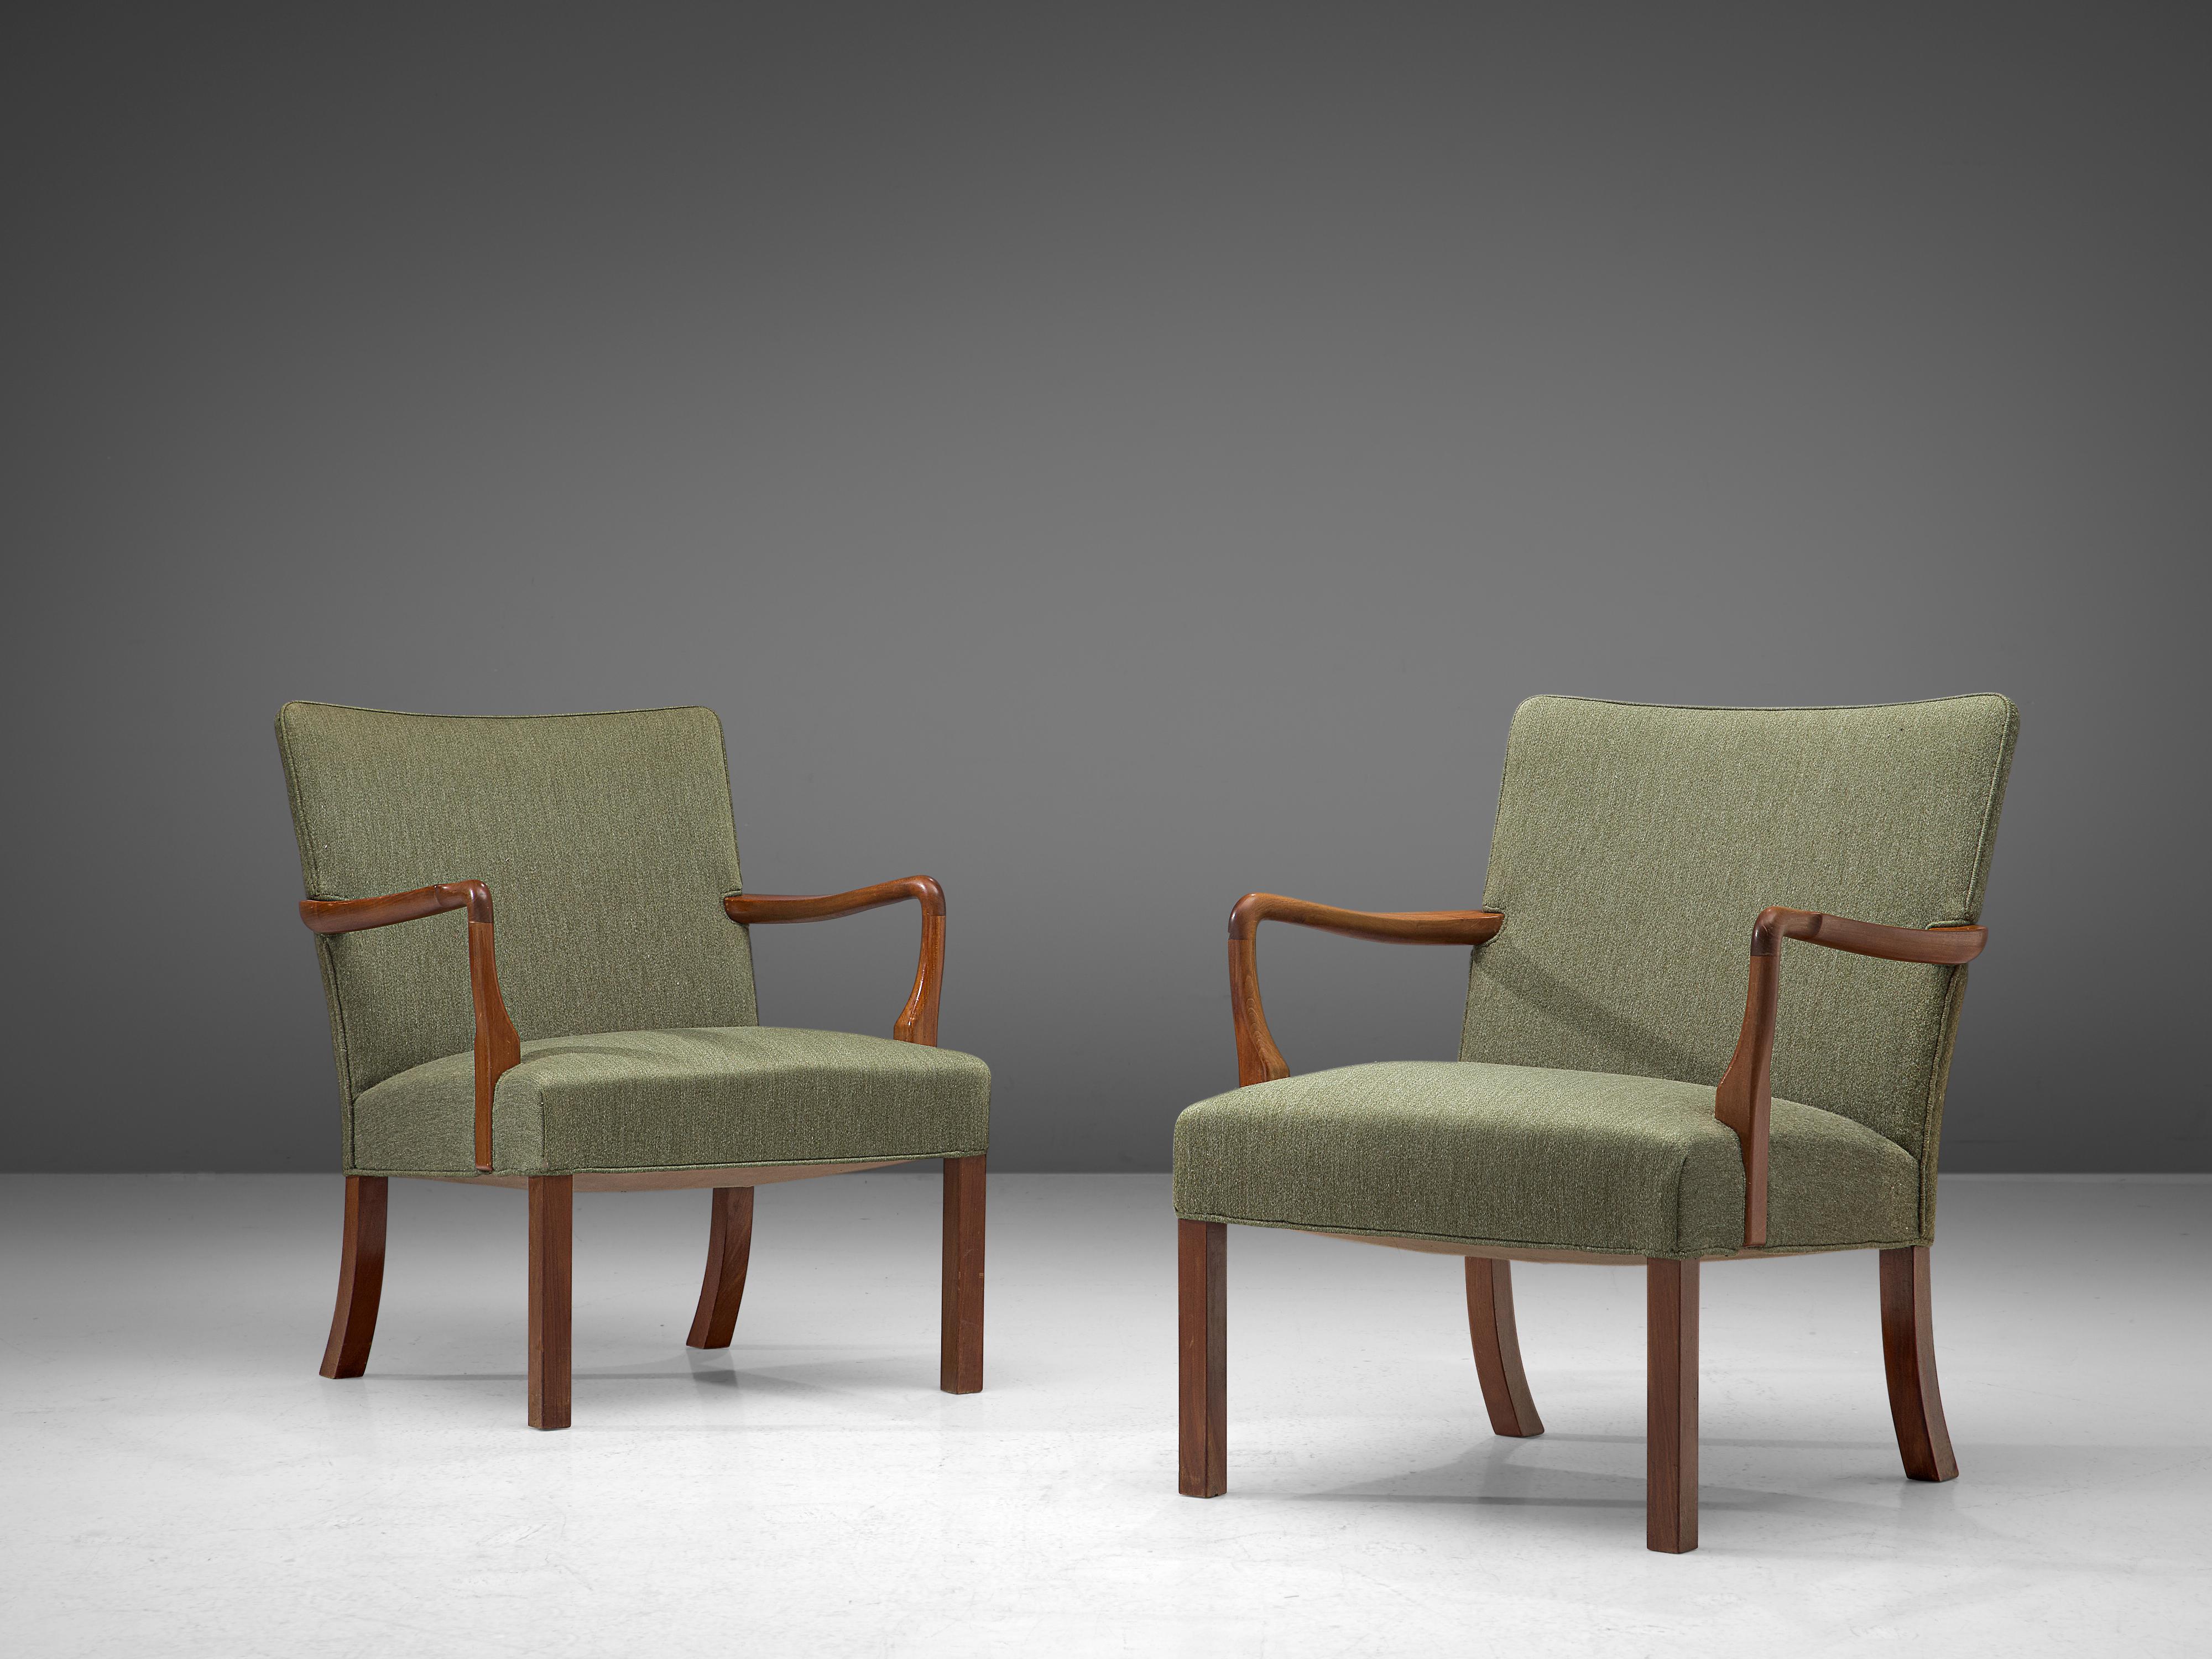 Jacob Kjær, pair of armchairs, mahogany, fabric, Denmark, 1940s

Stunning pair of armchairs by Danish master cabinetmaker Jacob Kjaer (1896-1957). Characterized by simplicity, the chairs are executed in the finest materials, such as mahogany. The